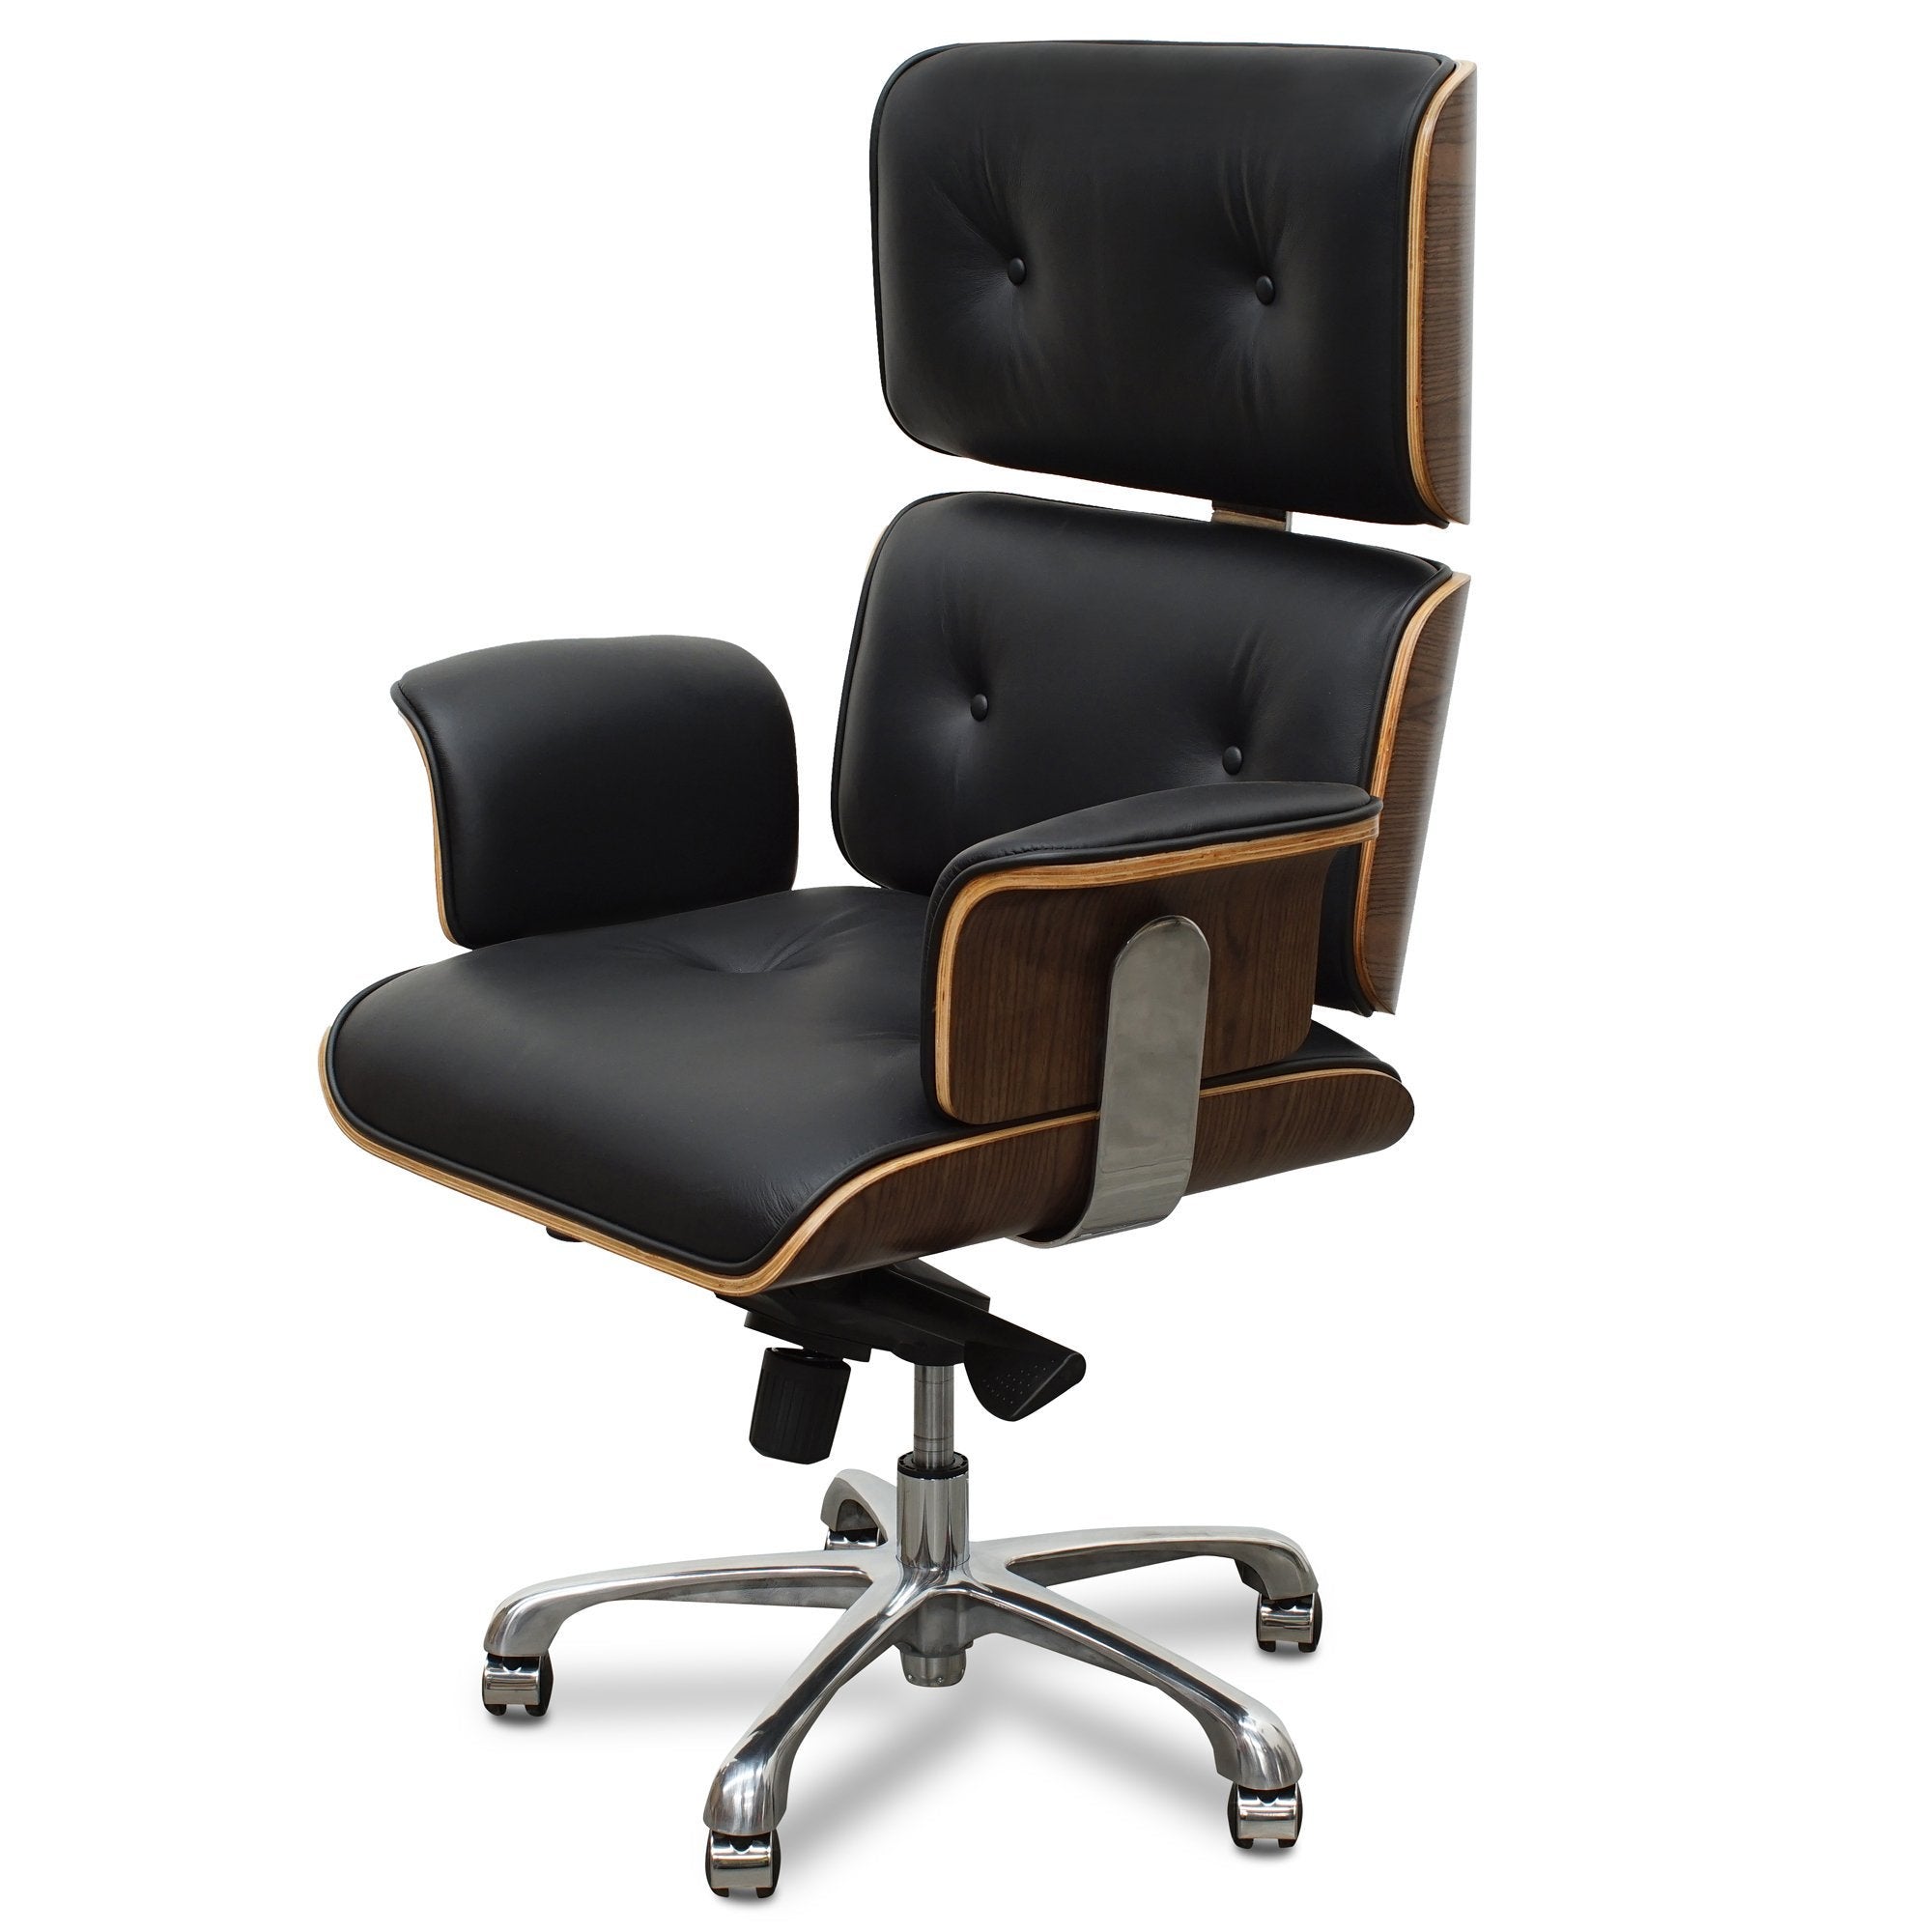 Eames Chair Replica Executive Office Chair Buy Massage